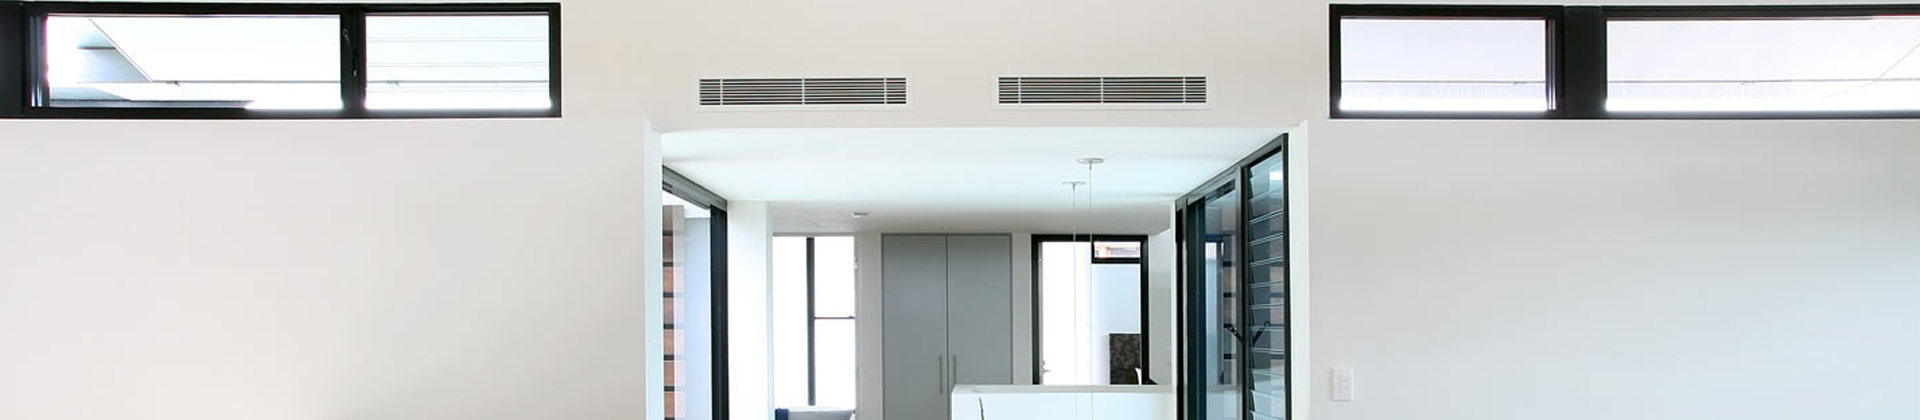 residential ducted air conditioning